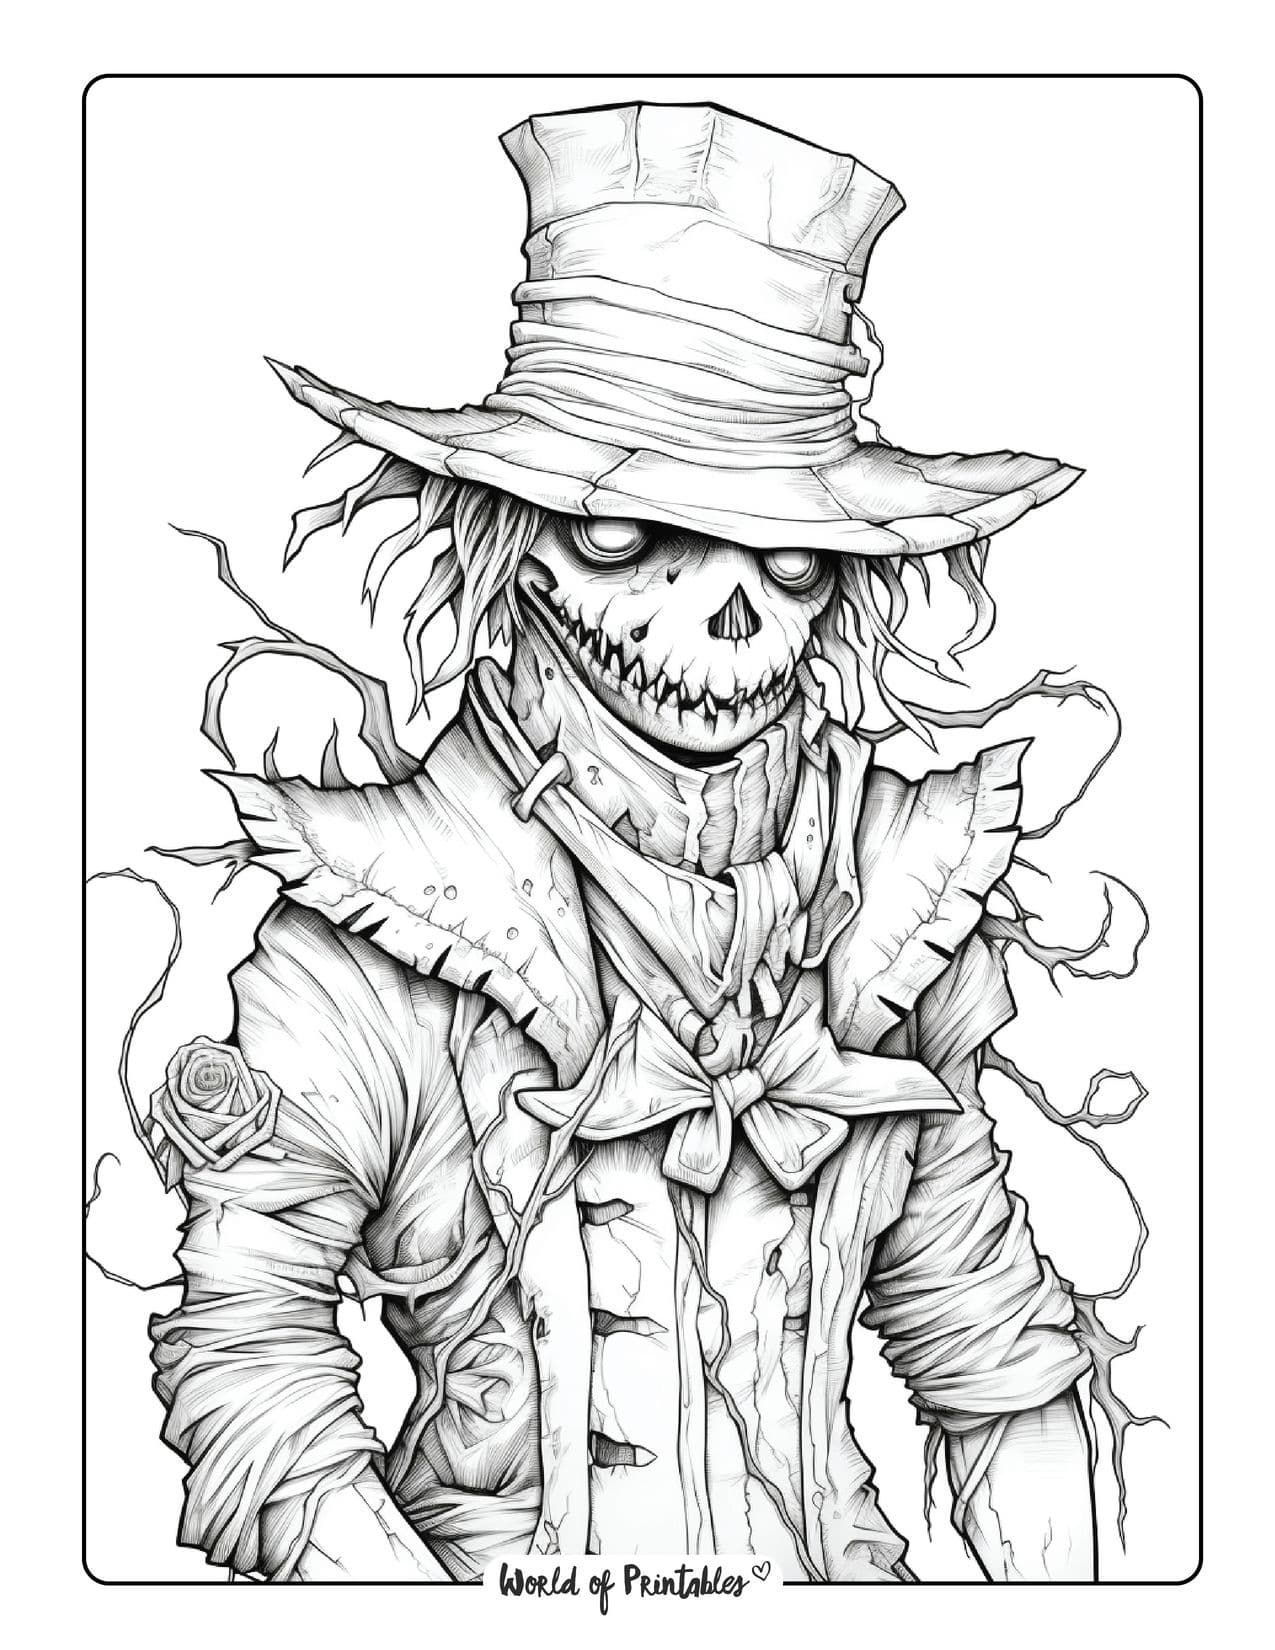 Dark and intricate horror coloring pages for adults